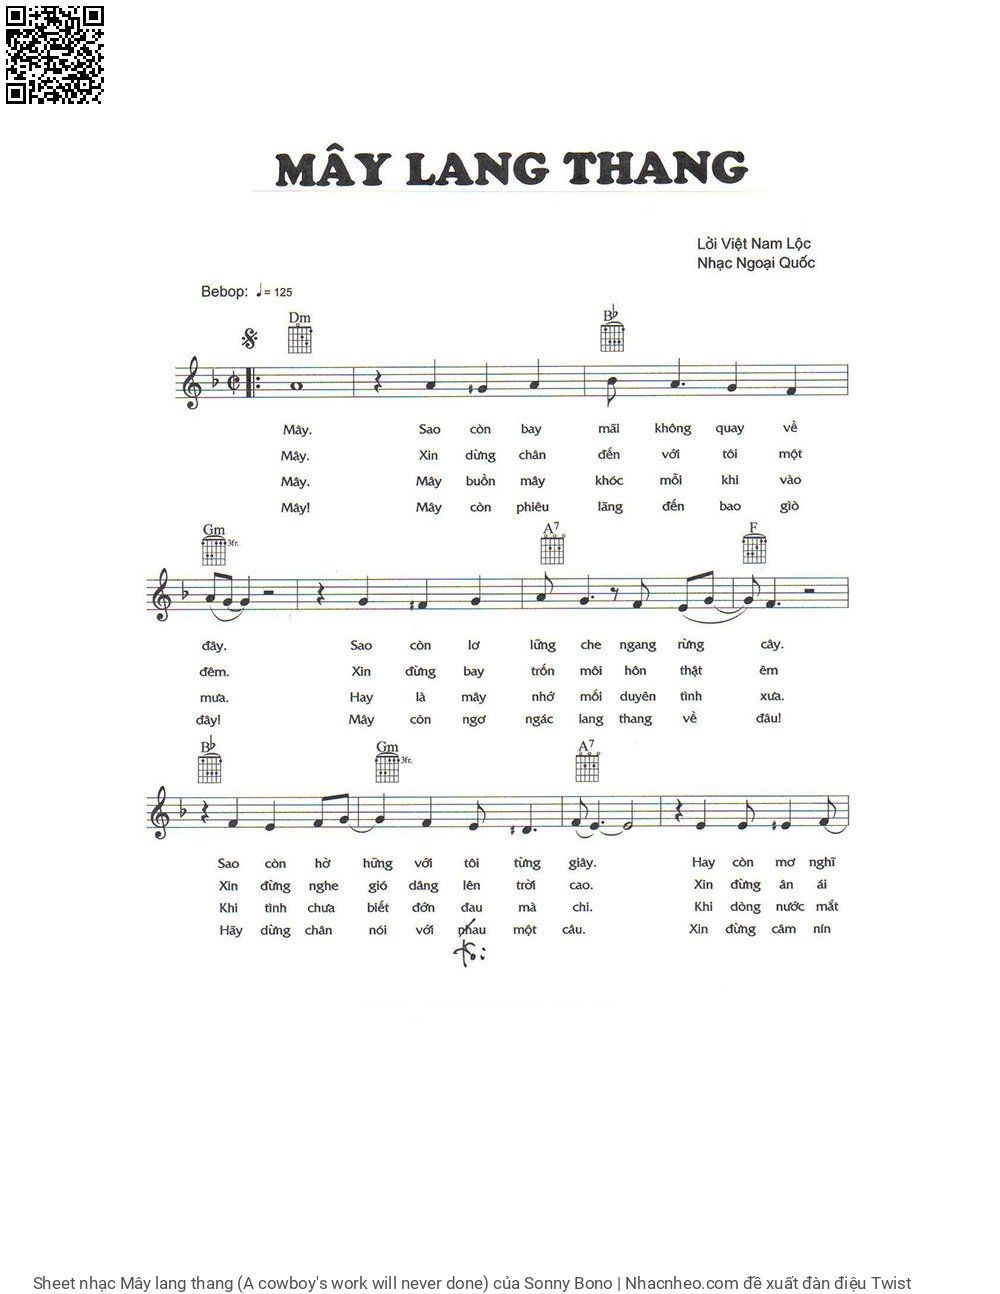 Mây lang thang (A cowboy's work will never done)